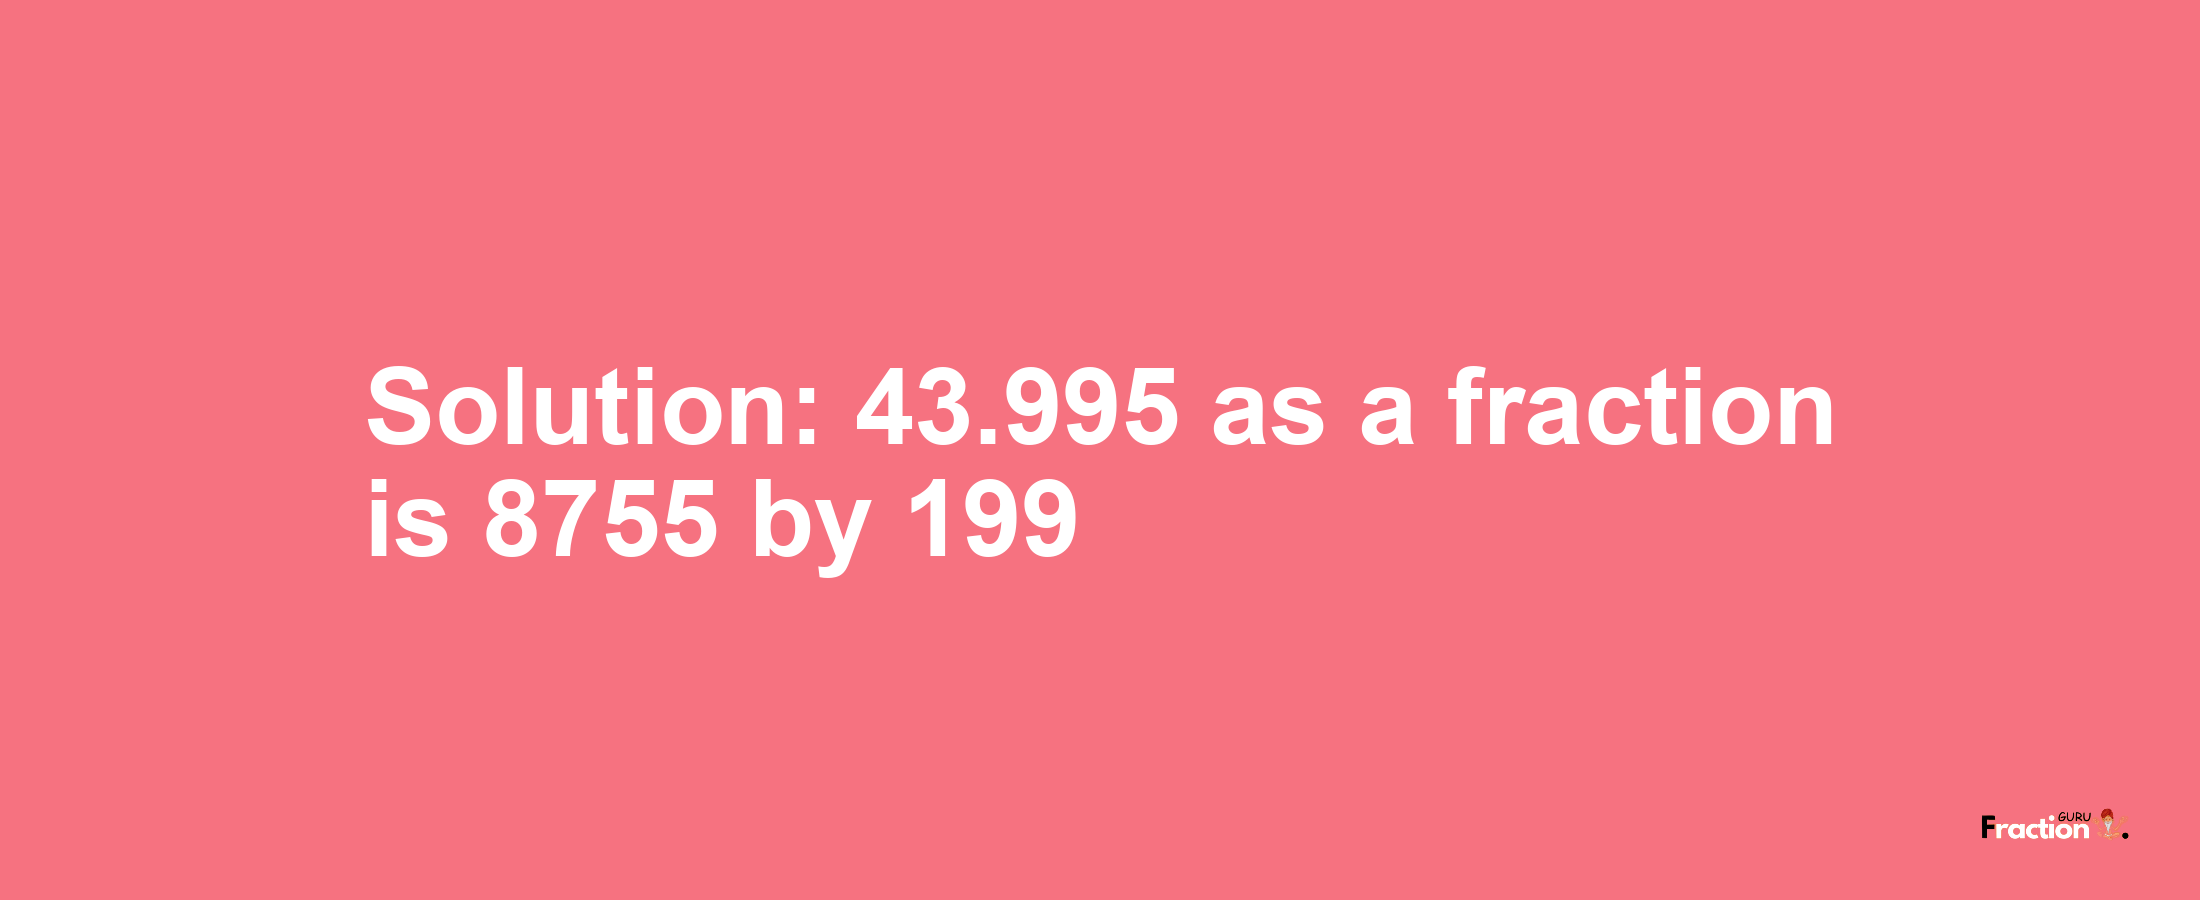 Solution:43.995 as a fraction is 8755/199